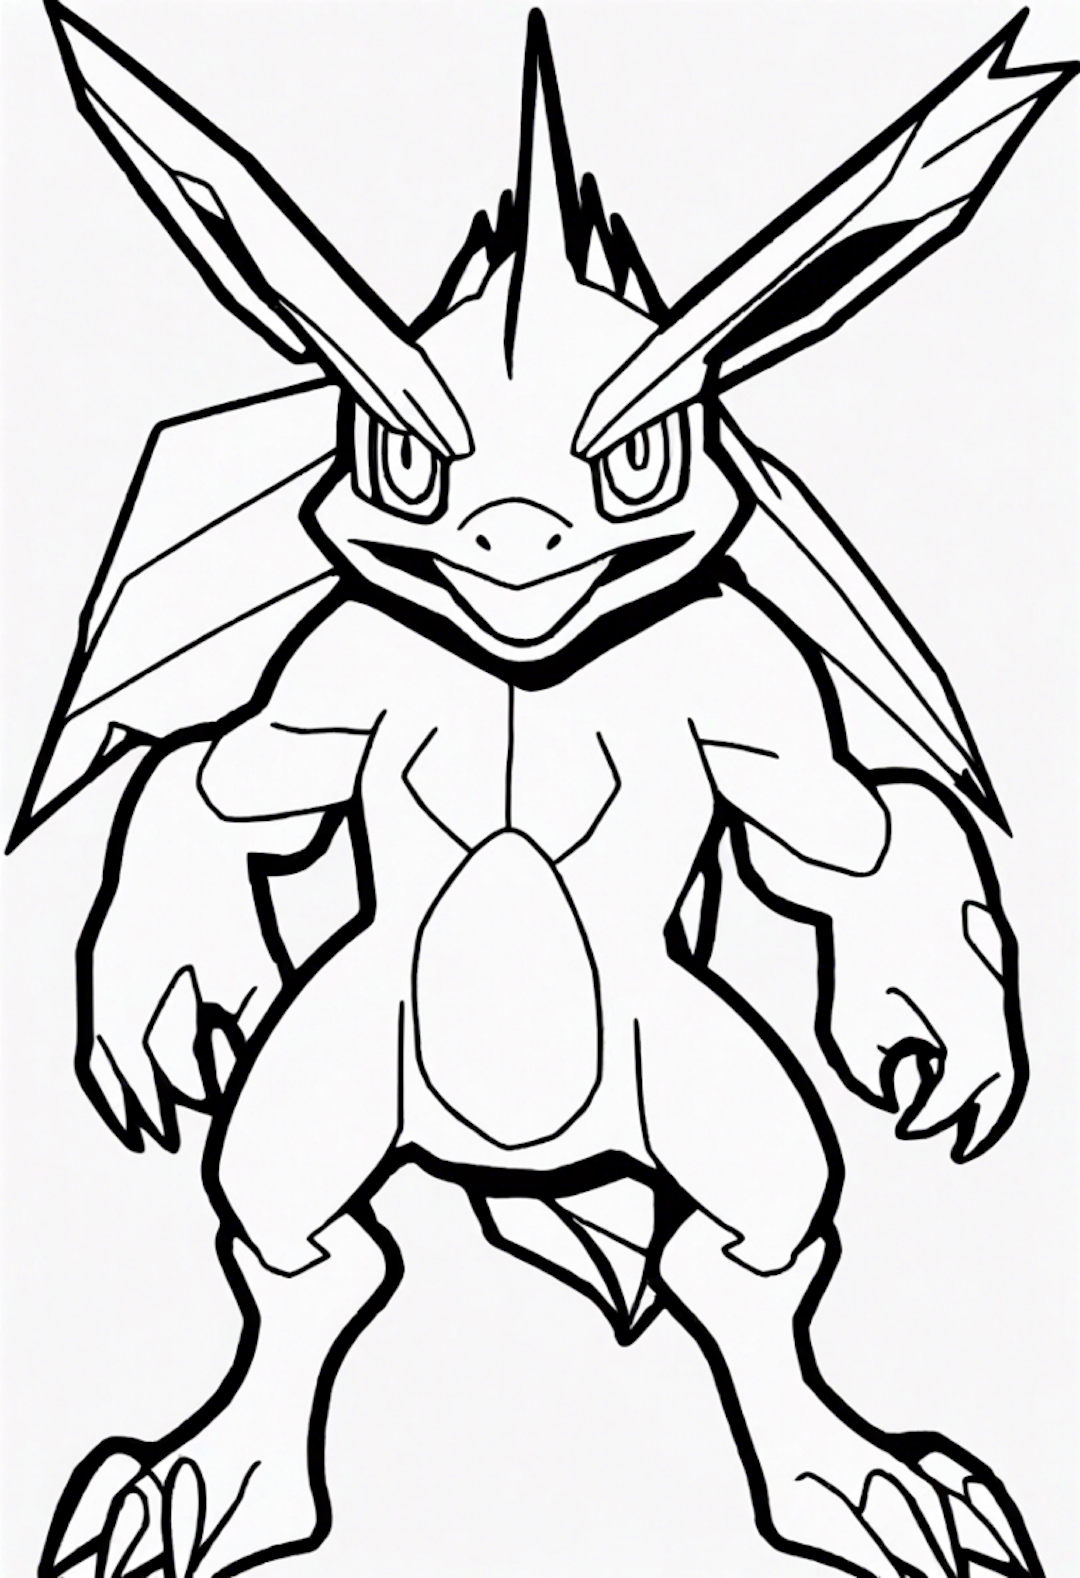 Sceptile Coloring Page Adventure coloring pages